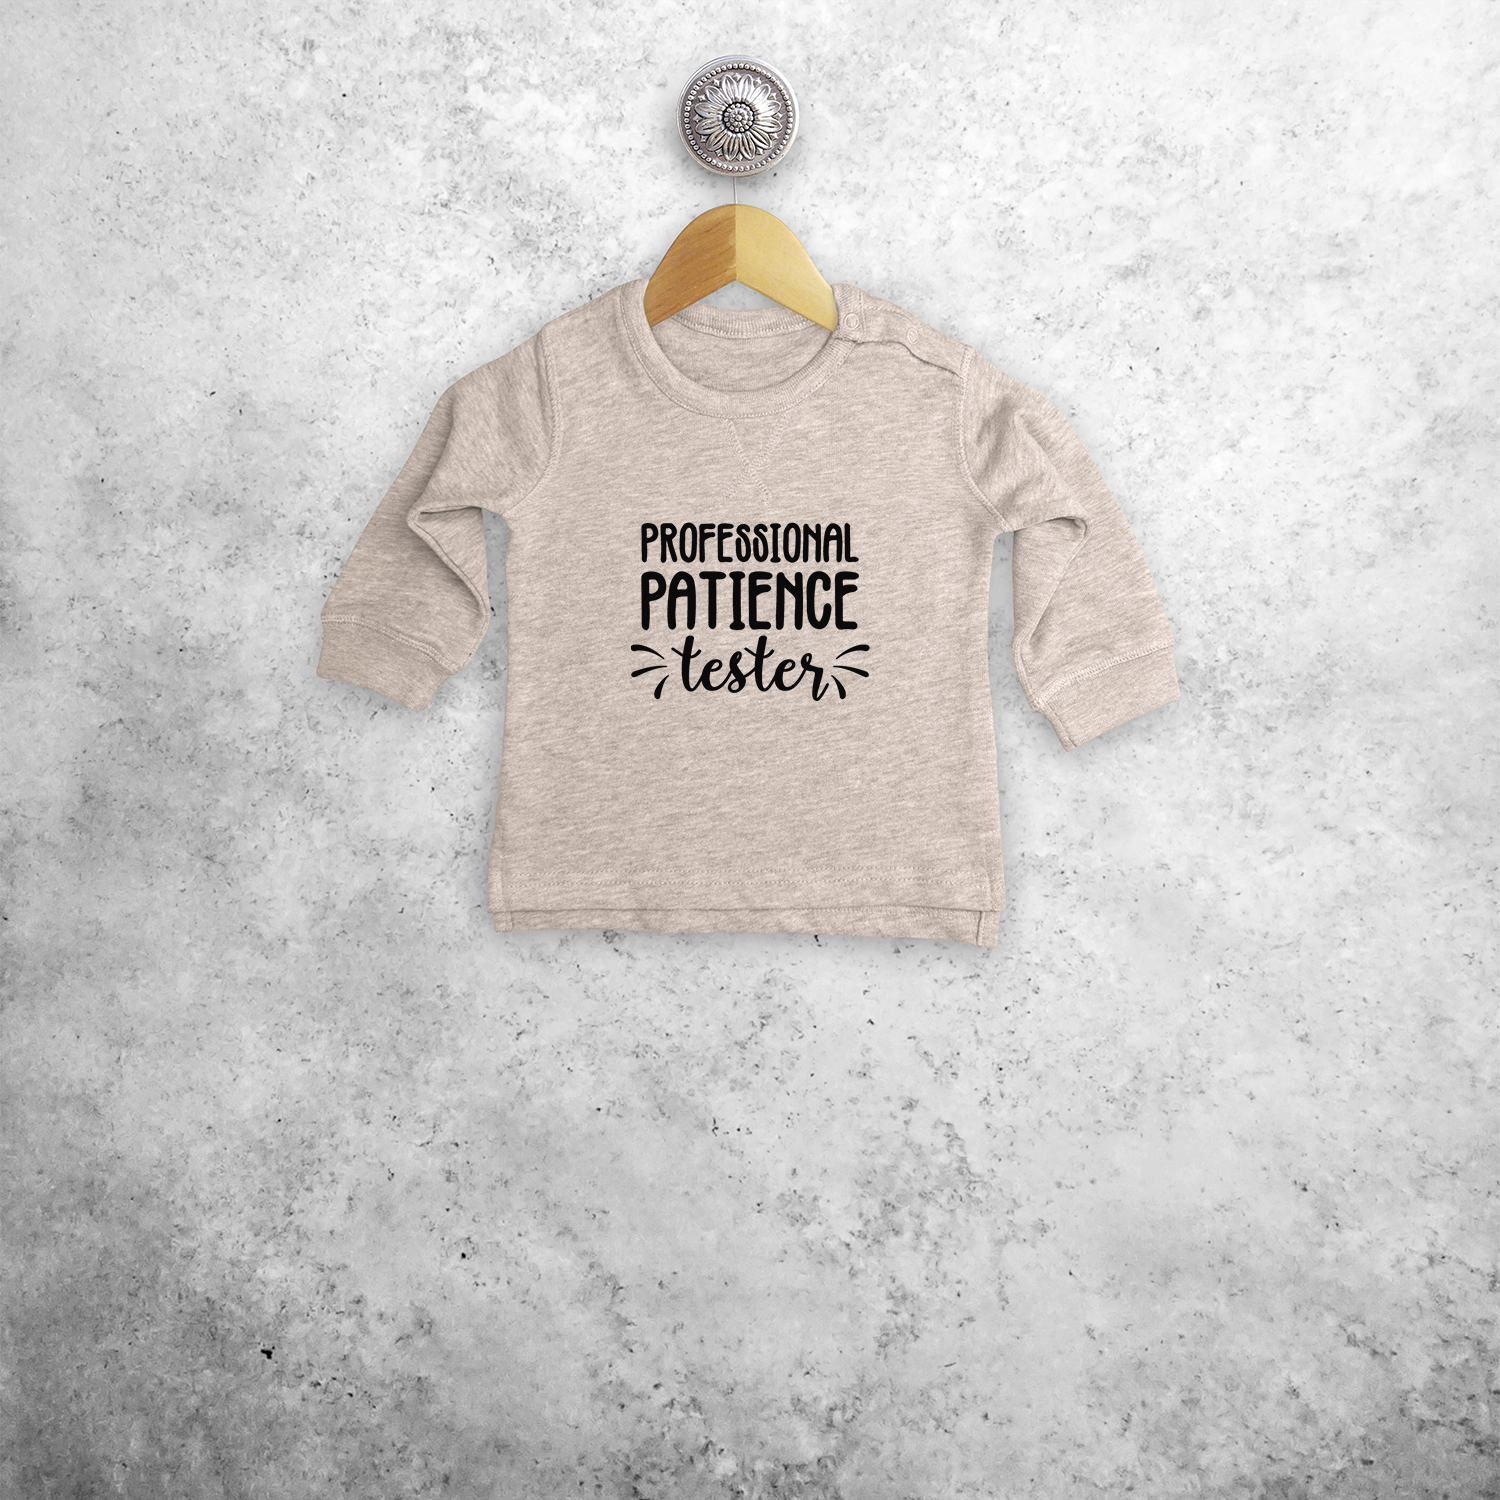 'Professional patience tester' baby sweater